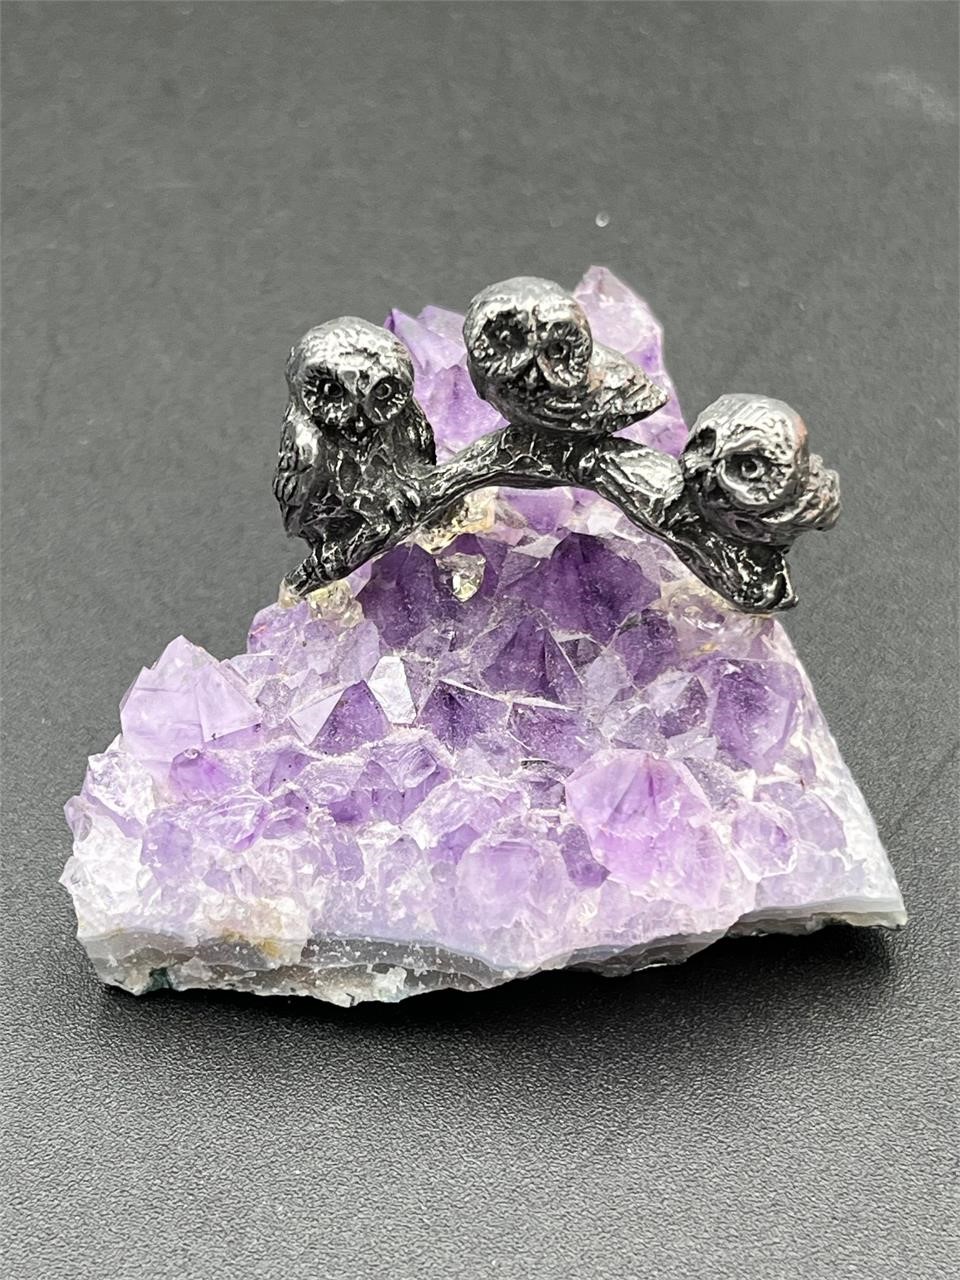 Pewter family of owls mounted on gorgeous amethyst